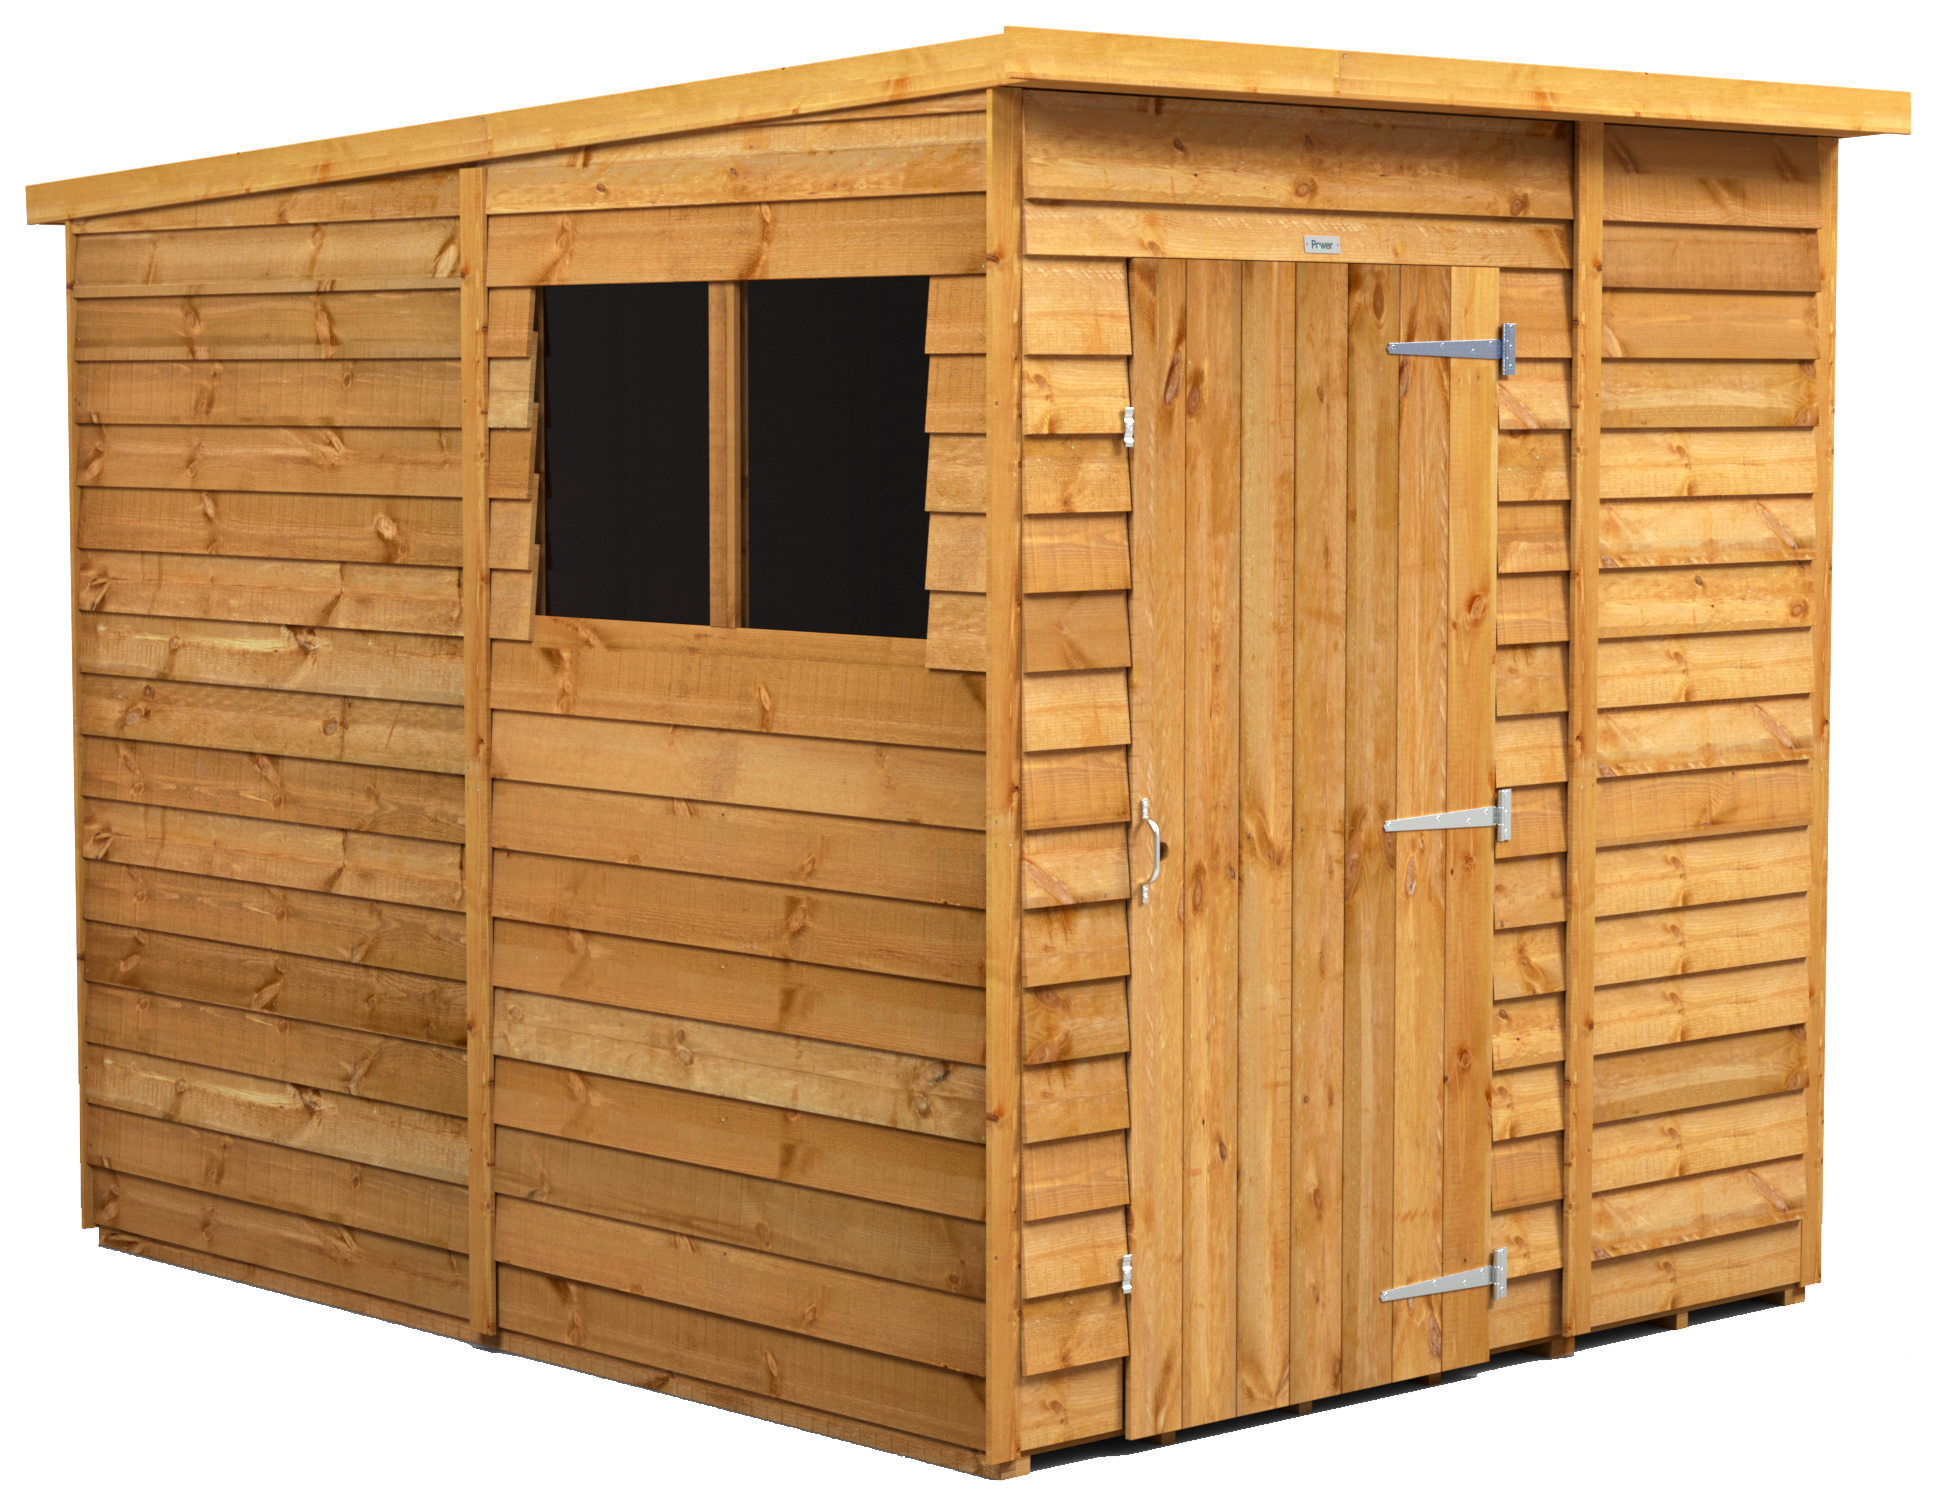 Power Sheds Pent Overlap Dip Treated Shed - 6 x 8ft